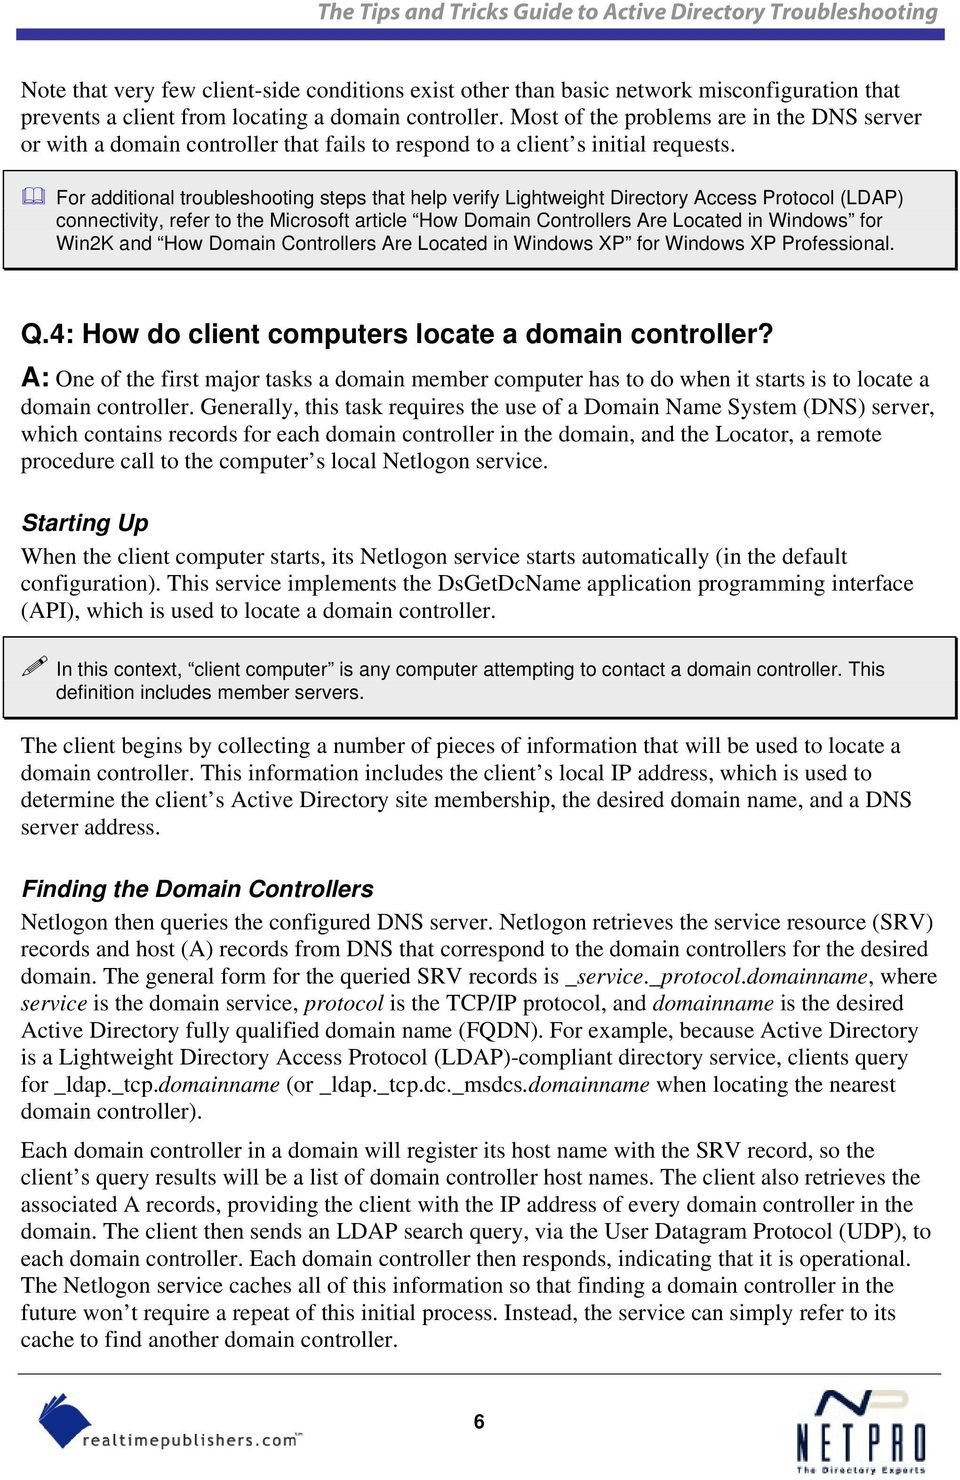 For additional troubleshooting steps that help verify Lightweight Directory Access Protocol (LDAP) connectivity, refer to the Microsoft article How Domain Controllers Are Located in Windows for Win2K